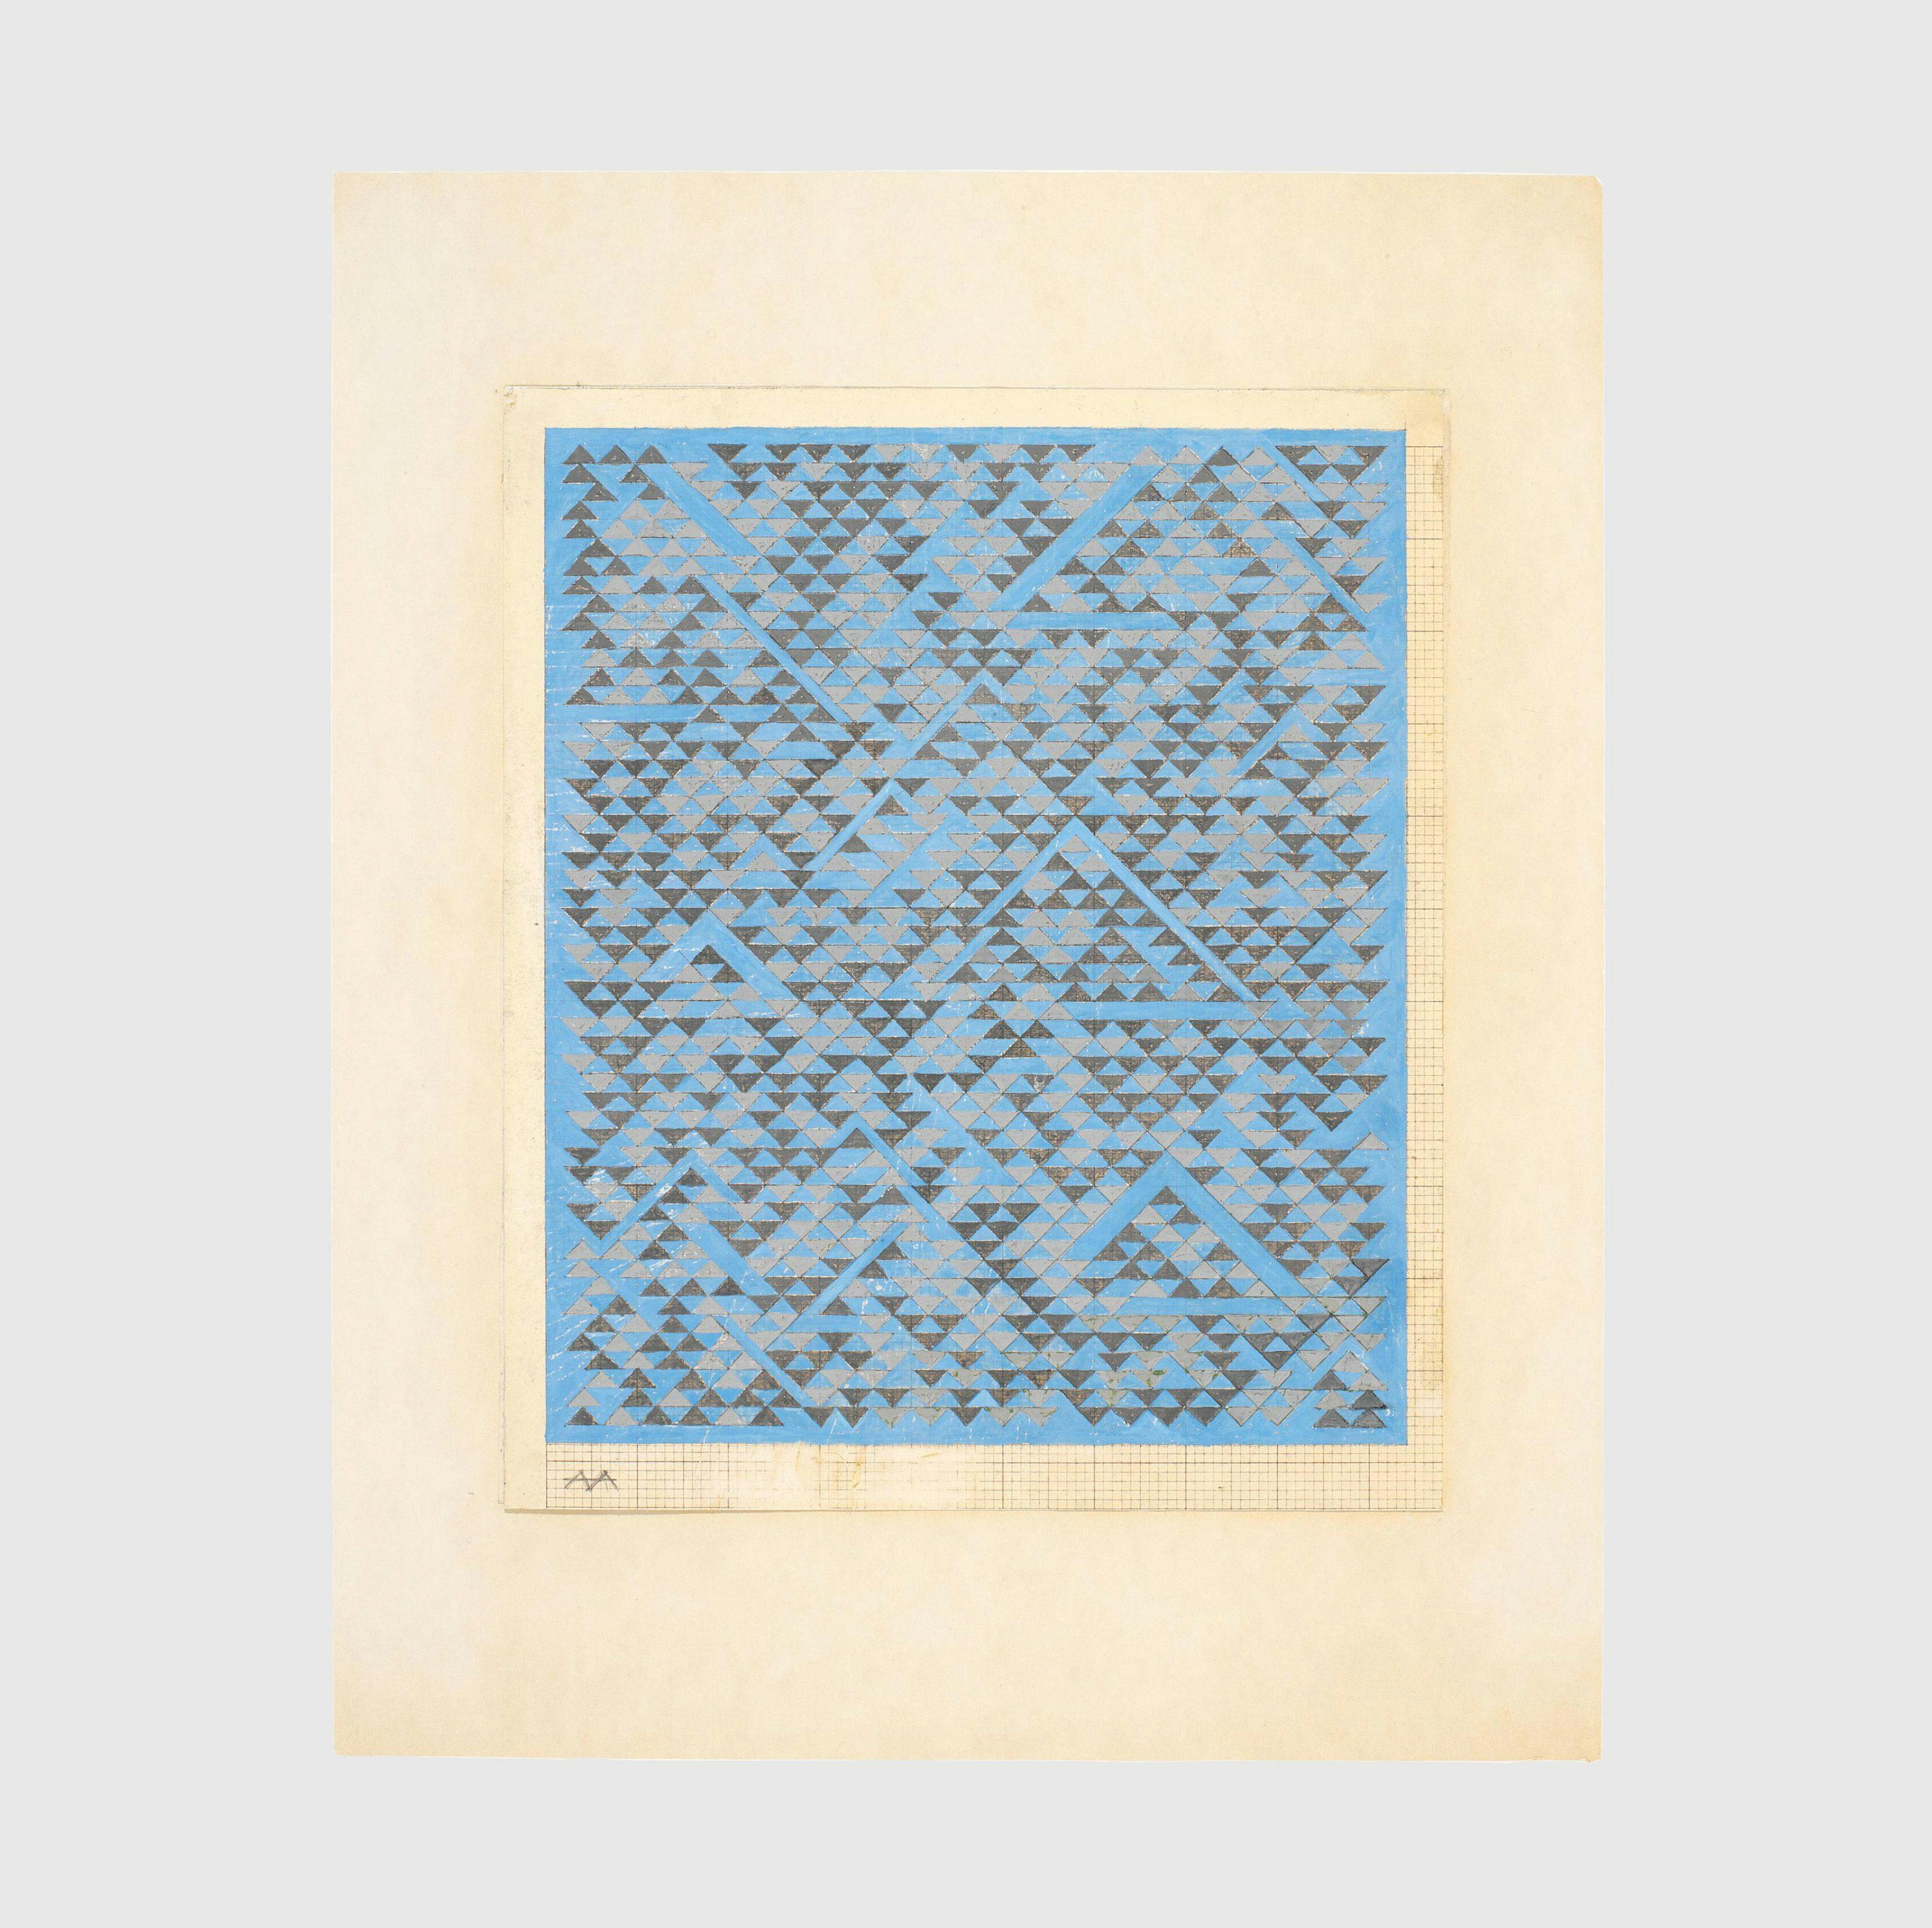 A drawing by Anni Albers, titled Study for A, dated 1968.